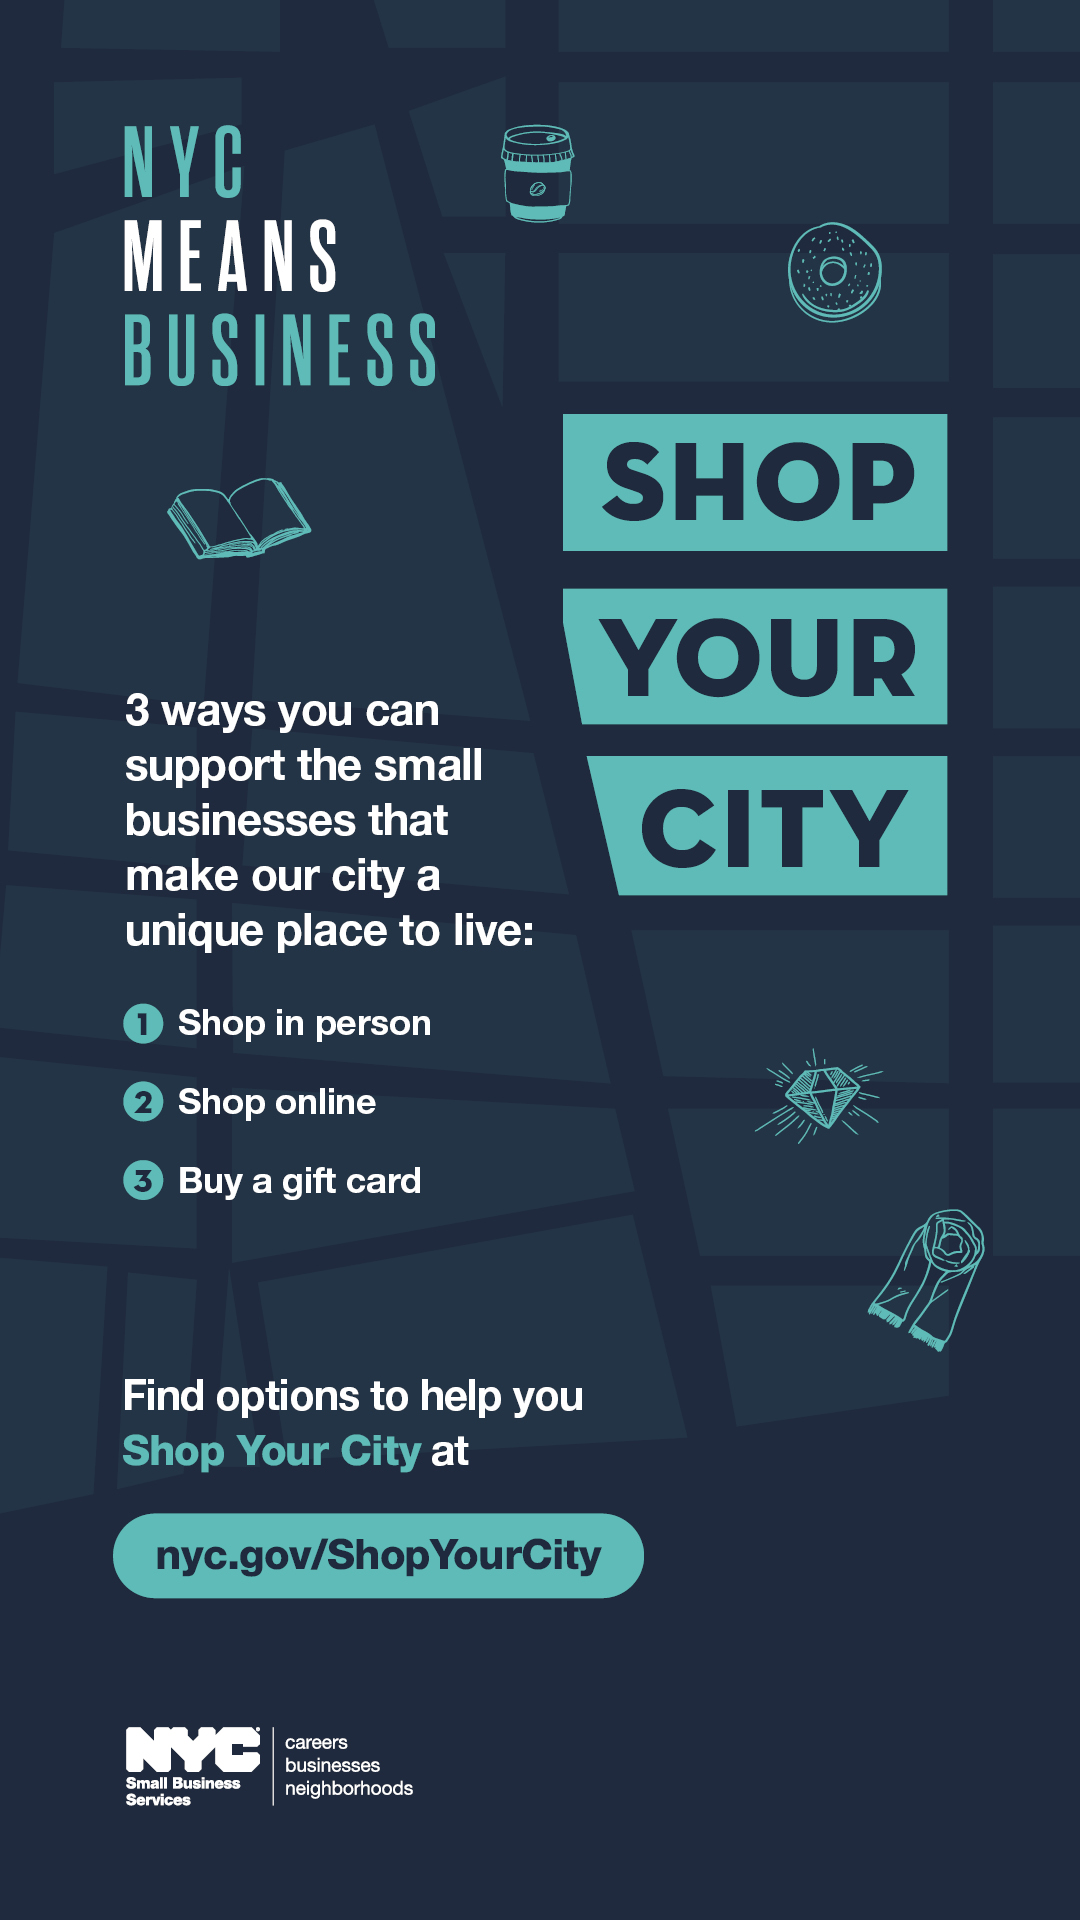 Promotional graphic for Shop Your City campaign with icons of items to purchase and text "NYC Means Business" and "Find options to help you Shop Your City"